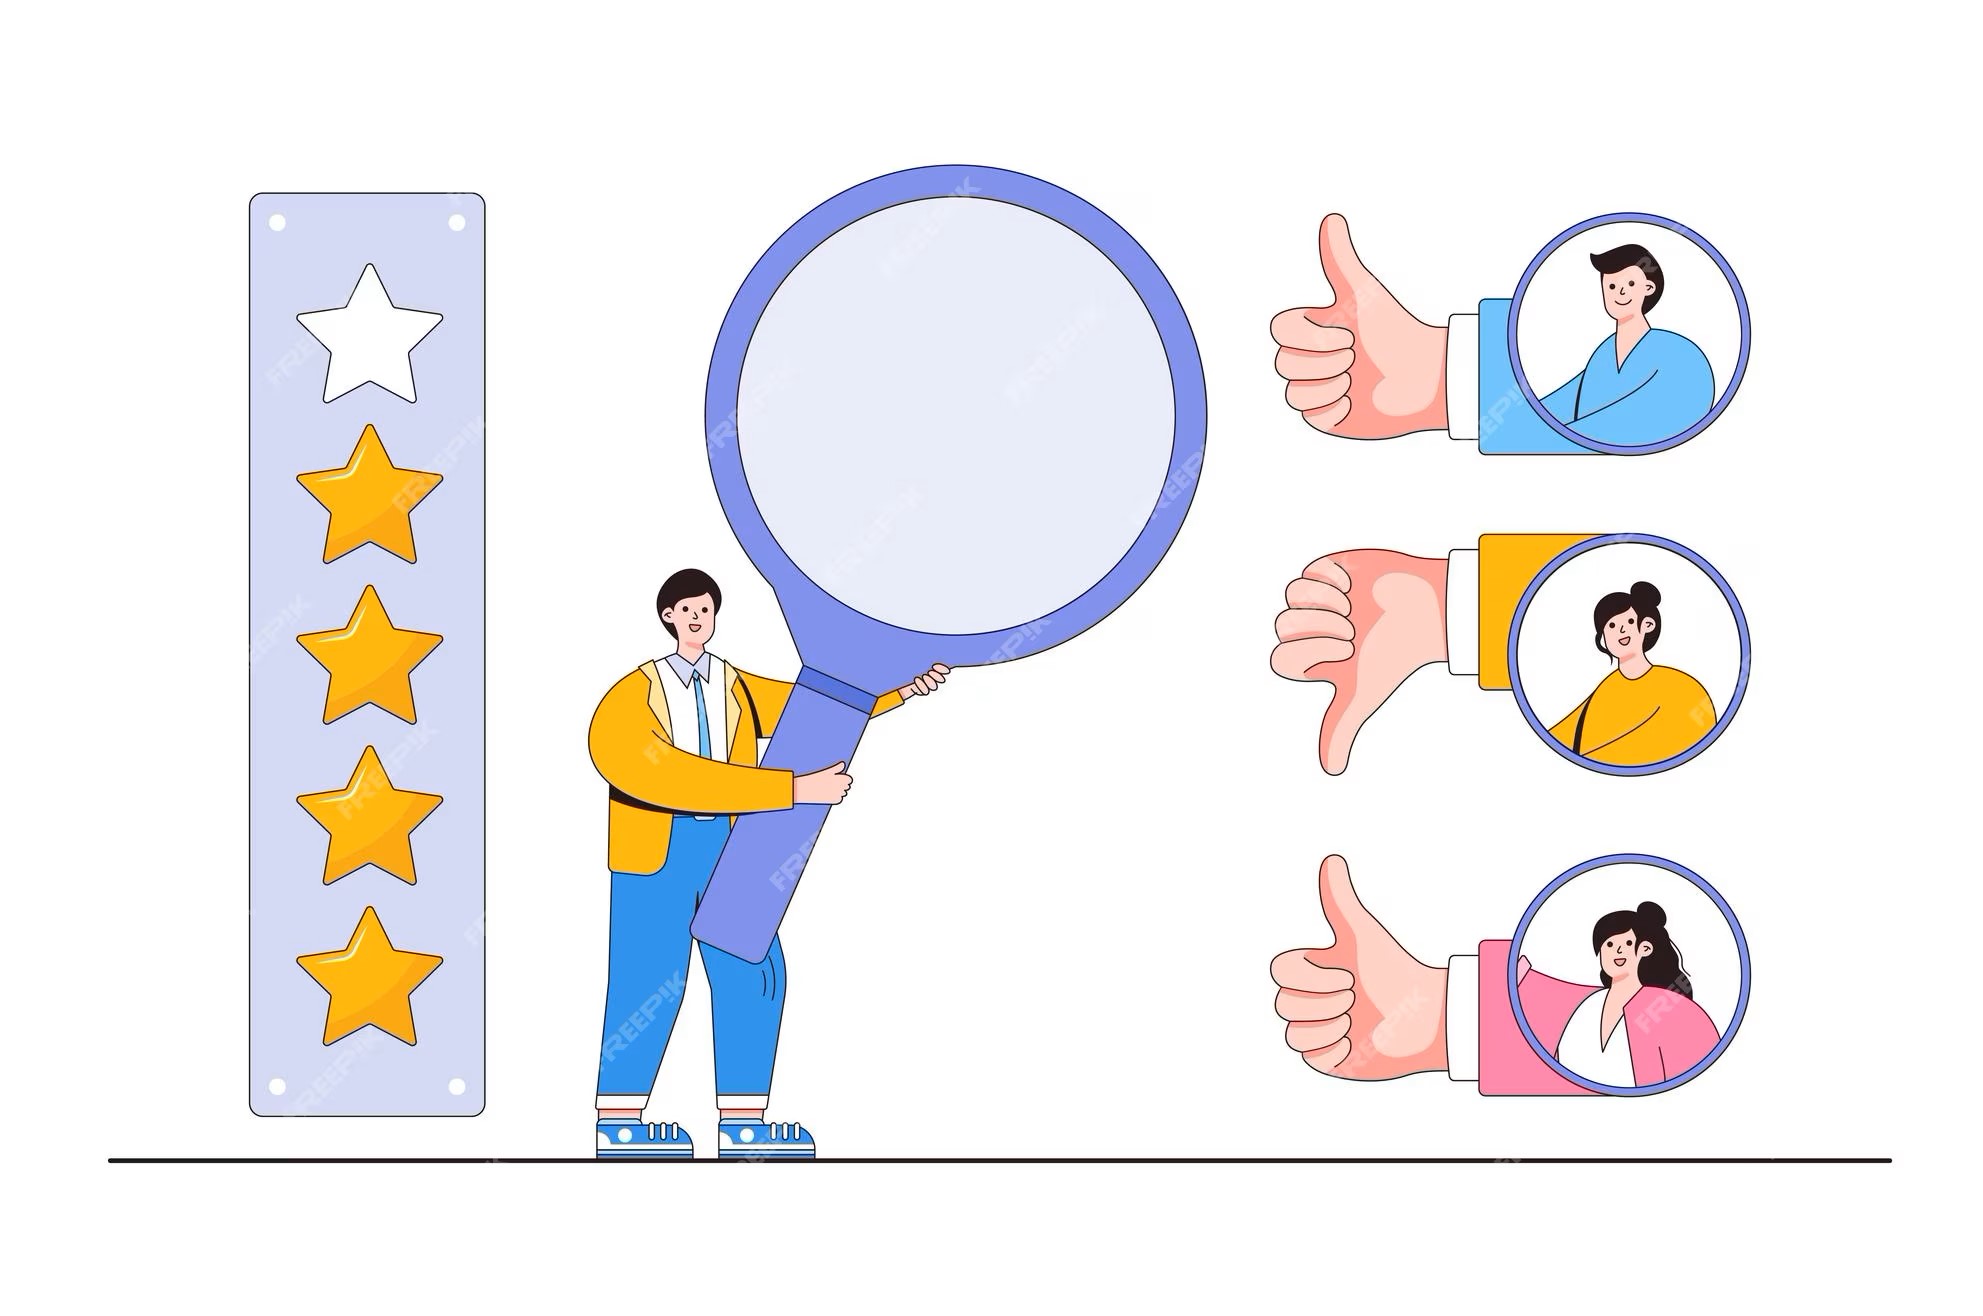 Why Negative Reviews Have a Stronger Impact